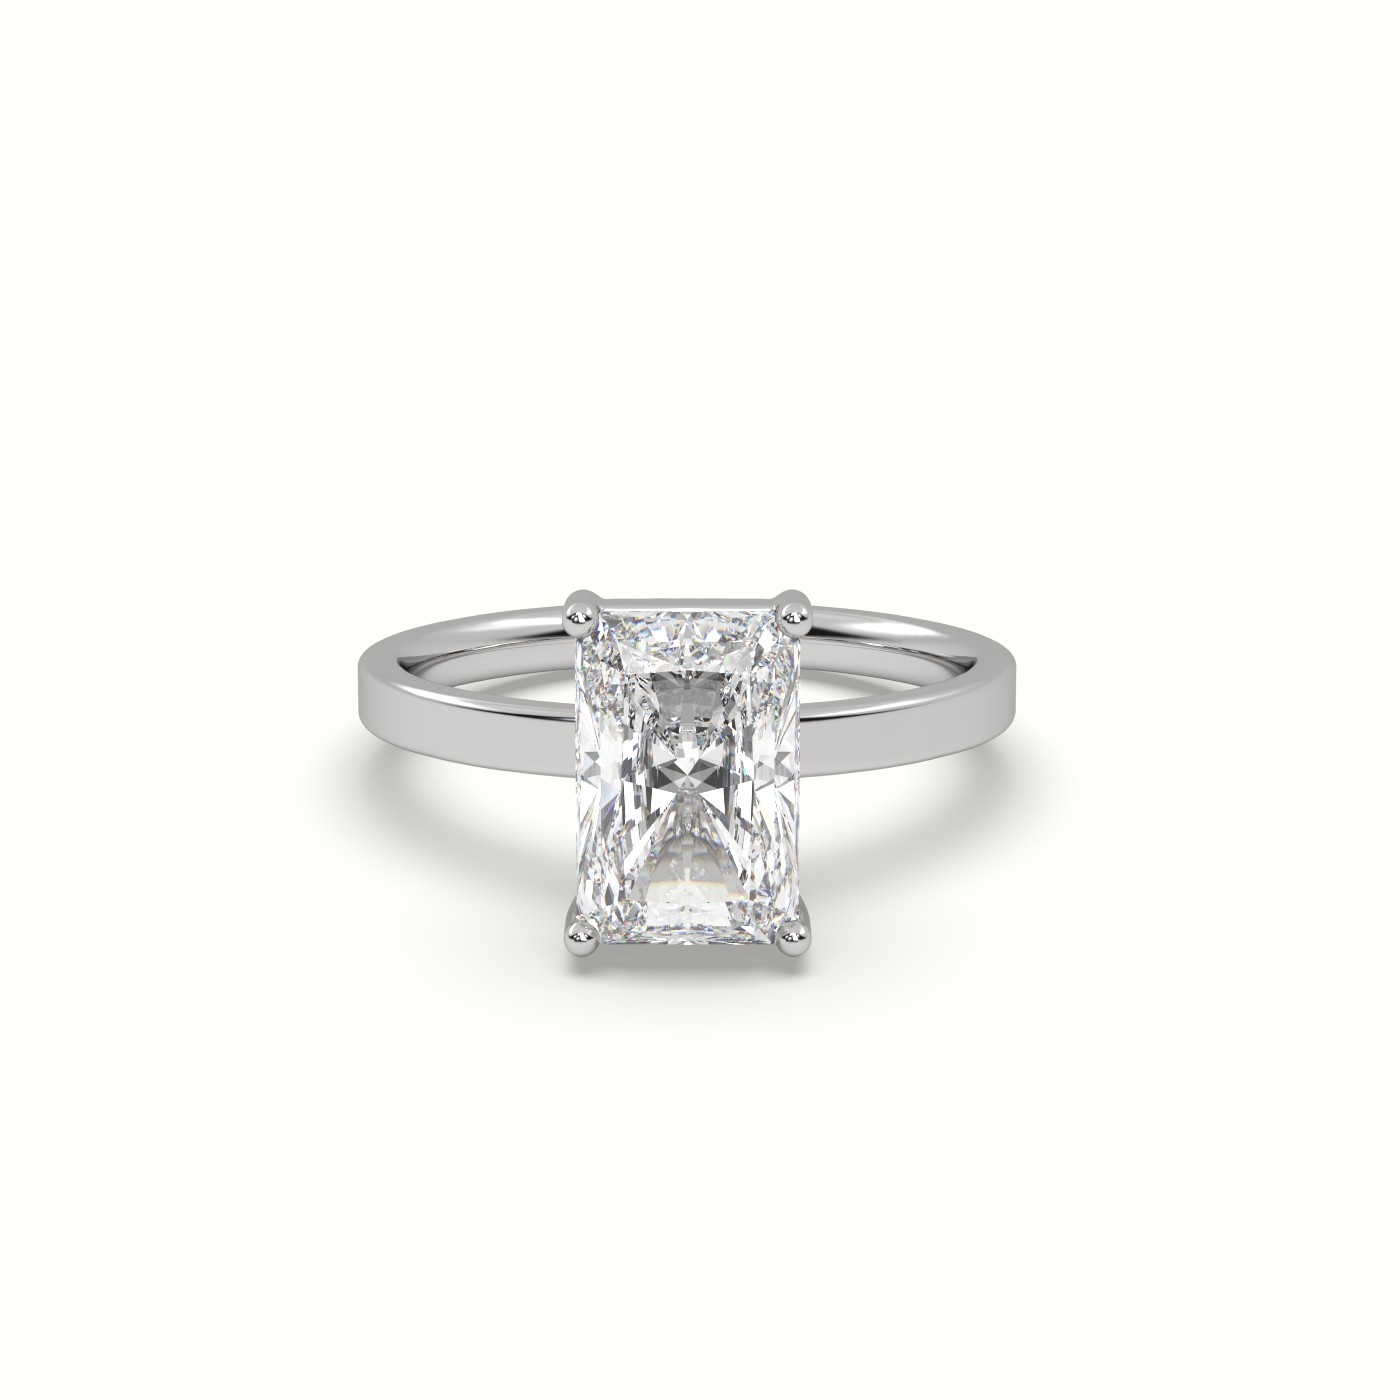 18K WHITE GOLD Radiant Cut Solitaire Diamond Ring Precious Jewels Antwerp Radiance